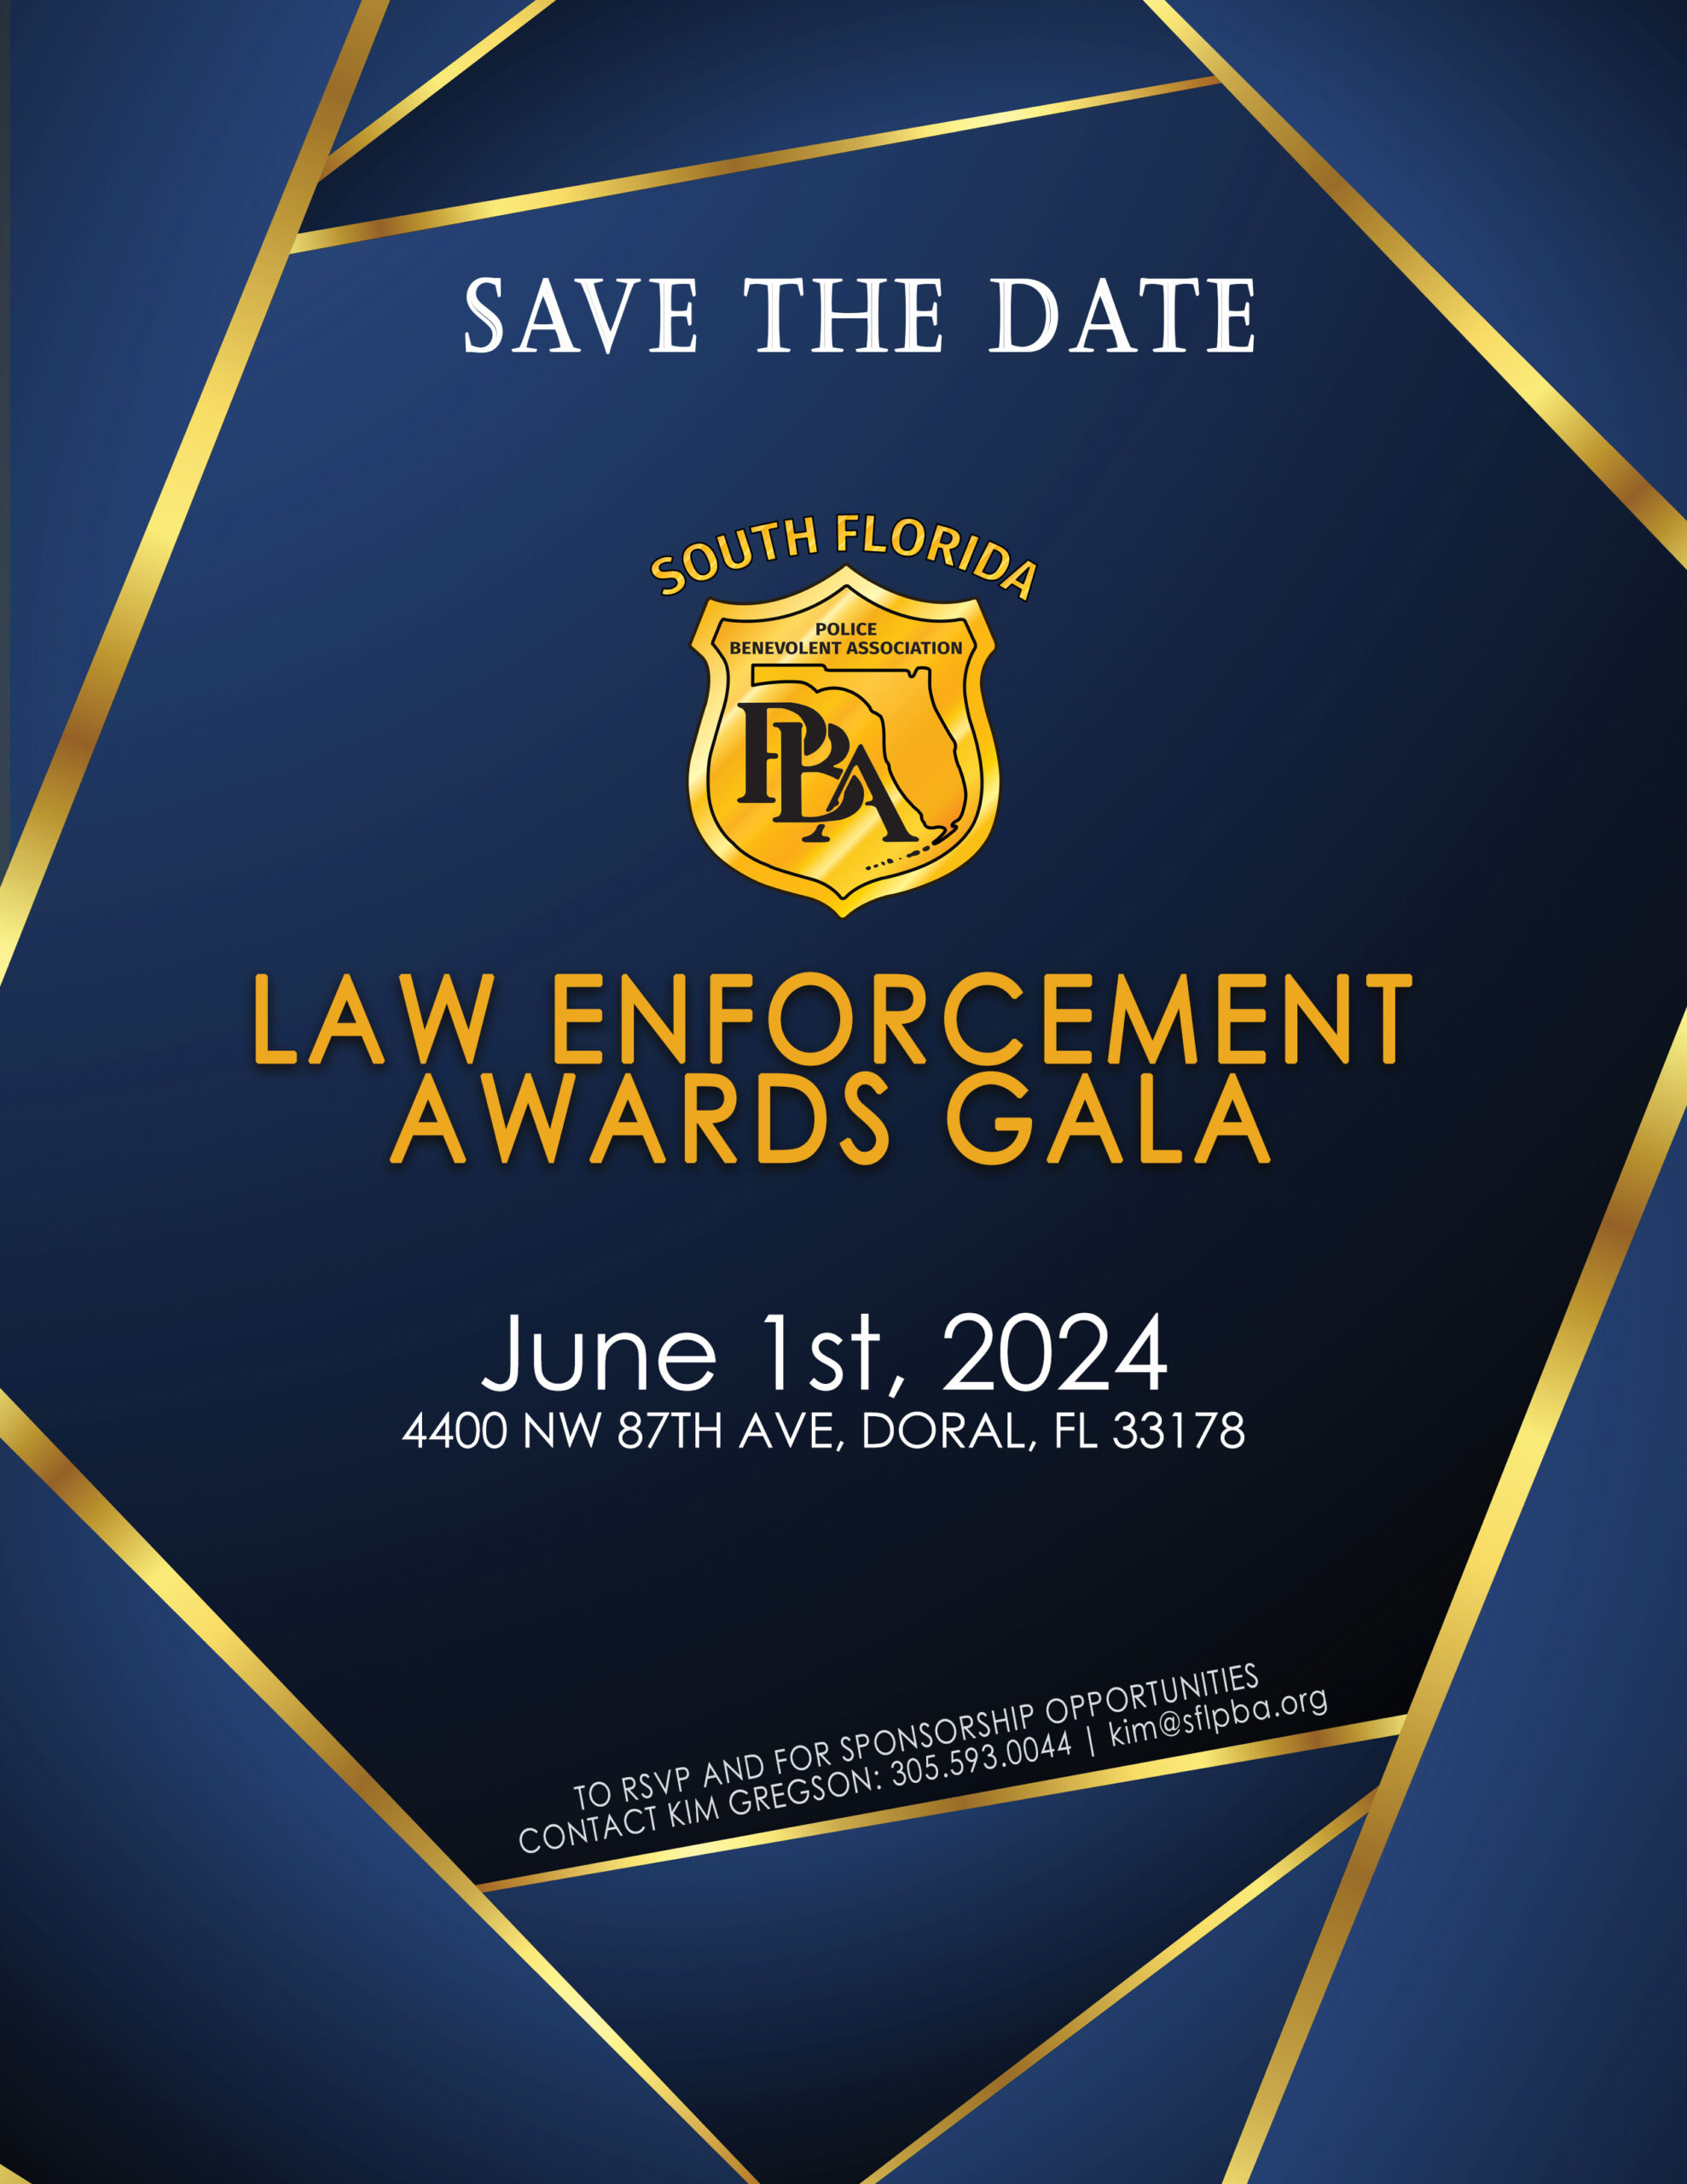 //dcpba.org/wp-content/uploads/2023/12/Save-the-Date-2024-Gala-scaled.jpg